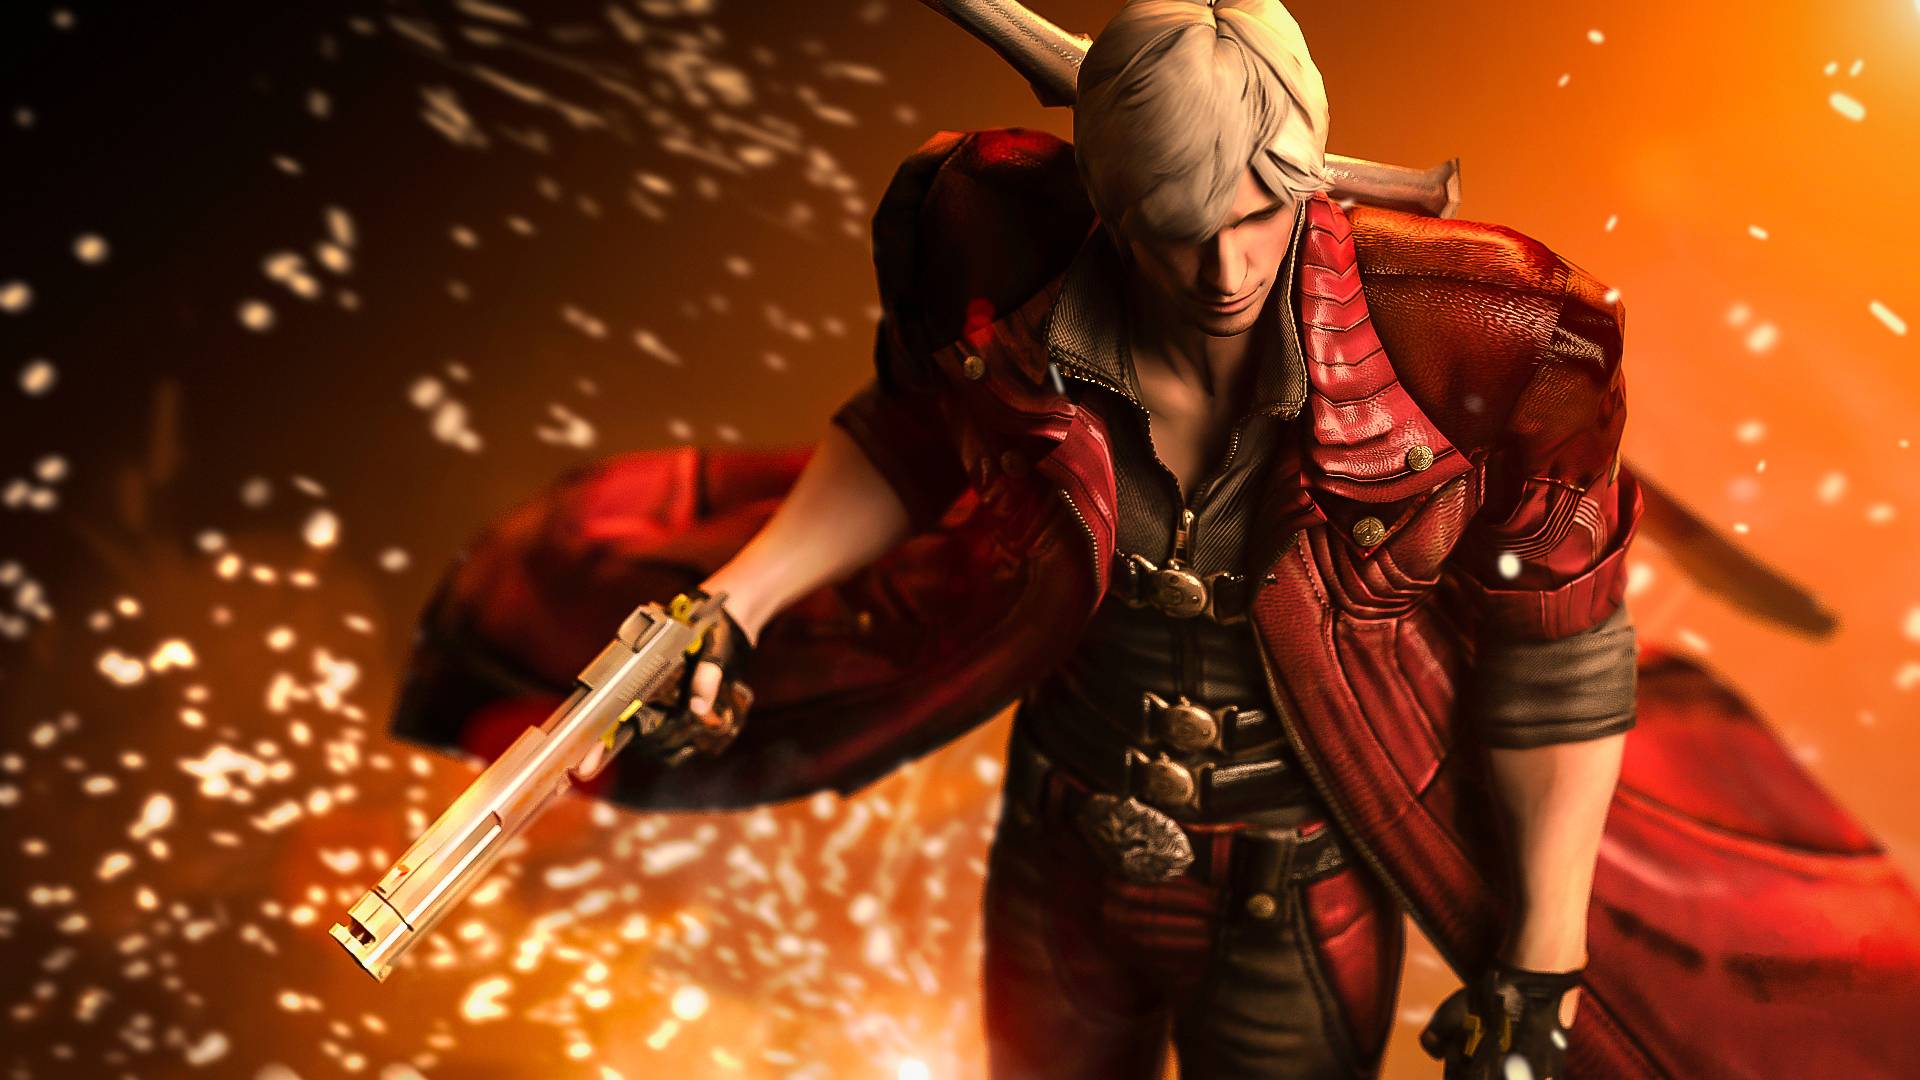 New Dante Devil May Cry 4 Wallpaper HD for Desktop Background